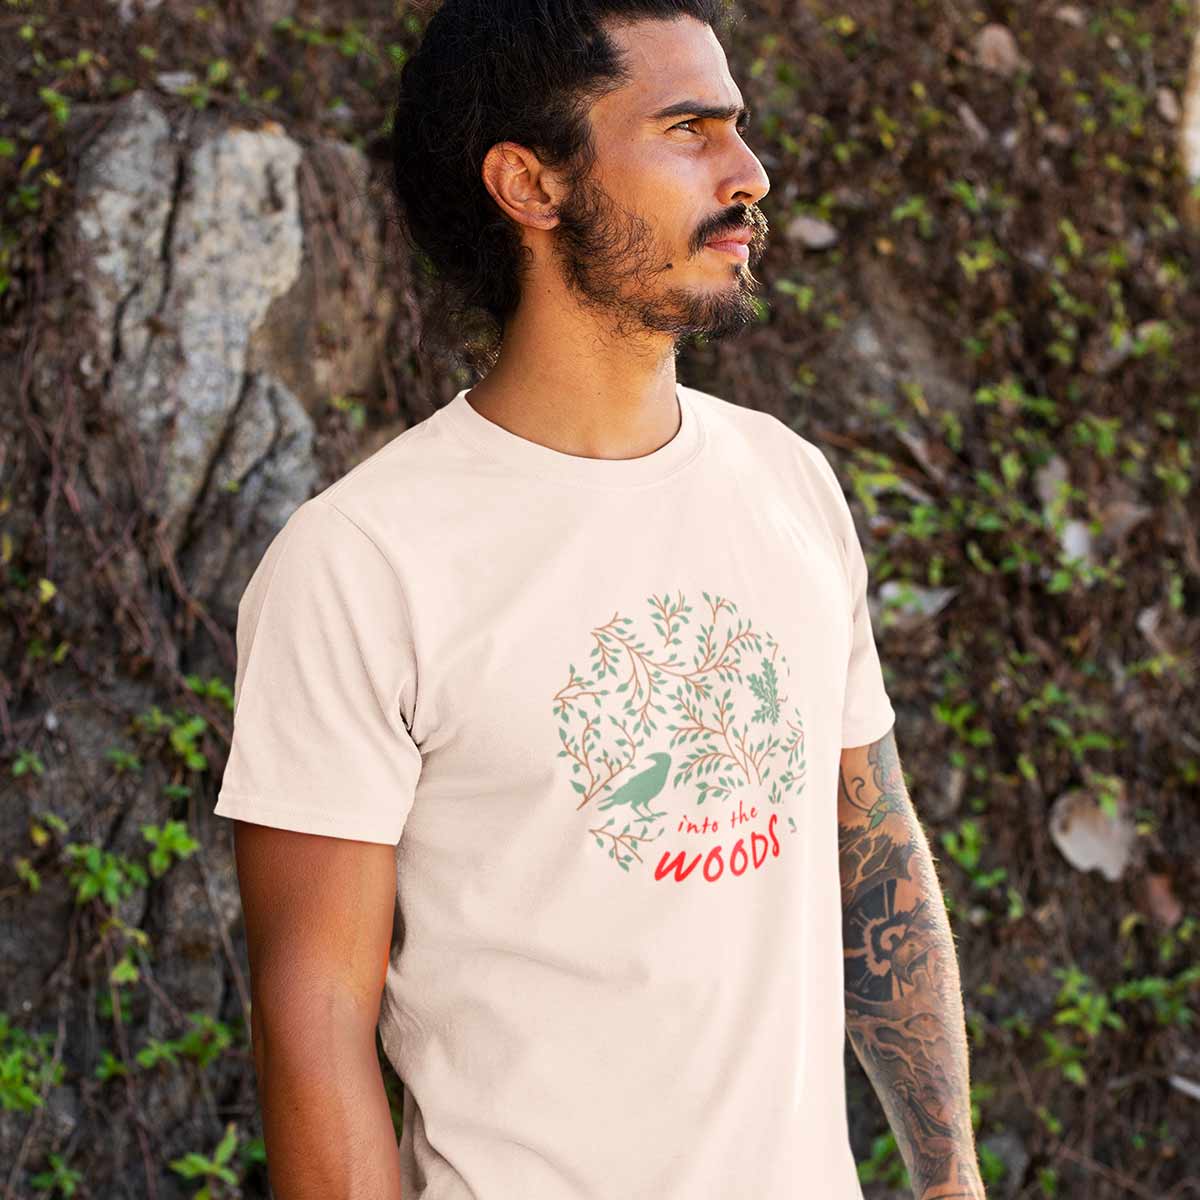 Into-the-woods-printed-t-shirt-for-men by Ghumakkad